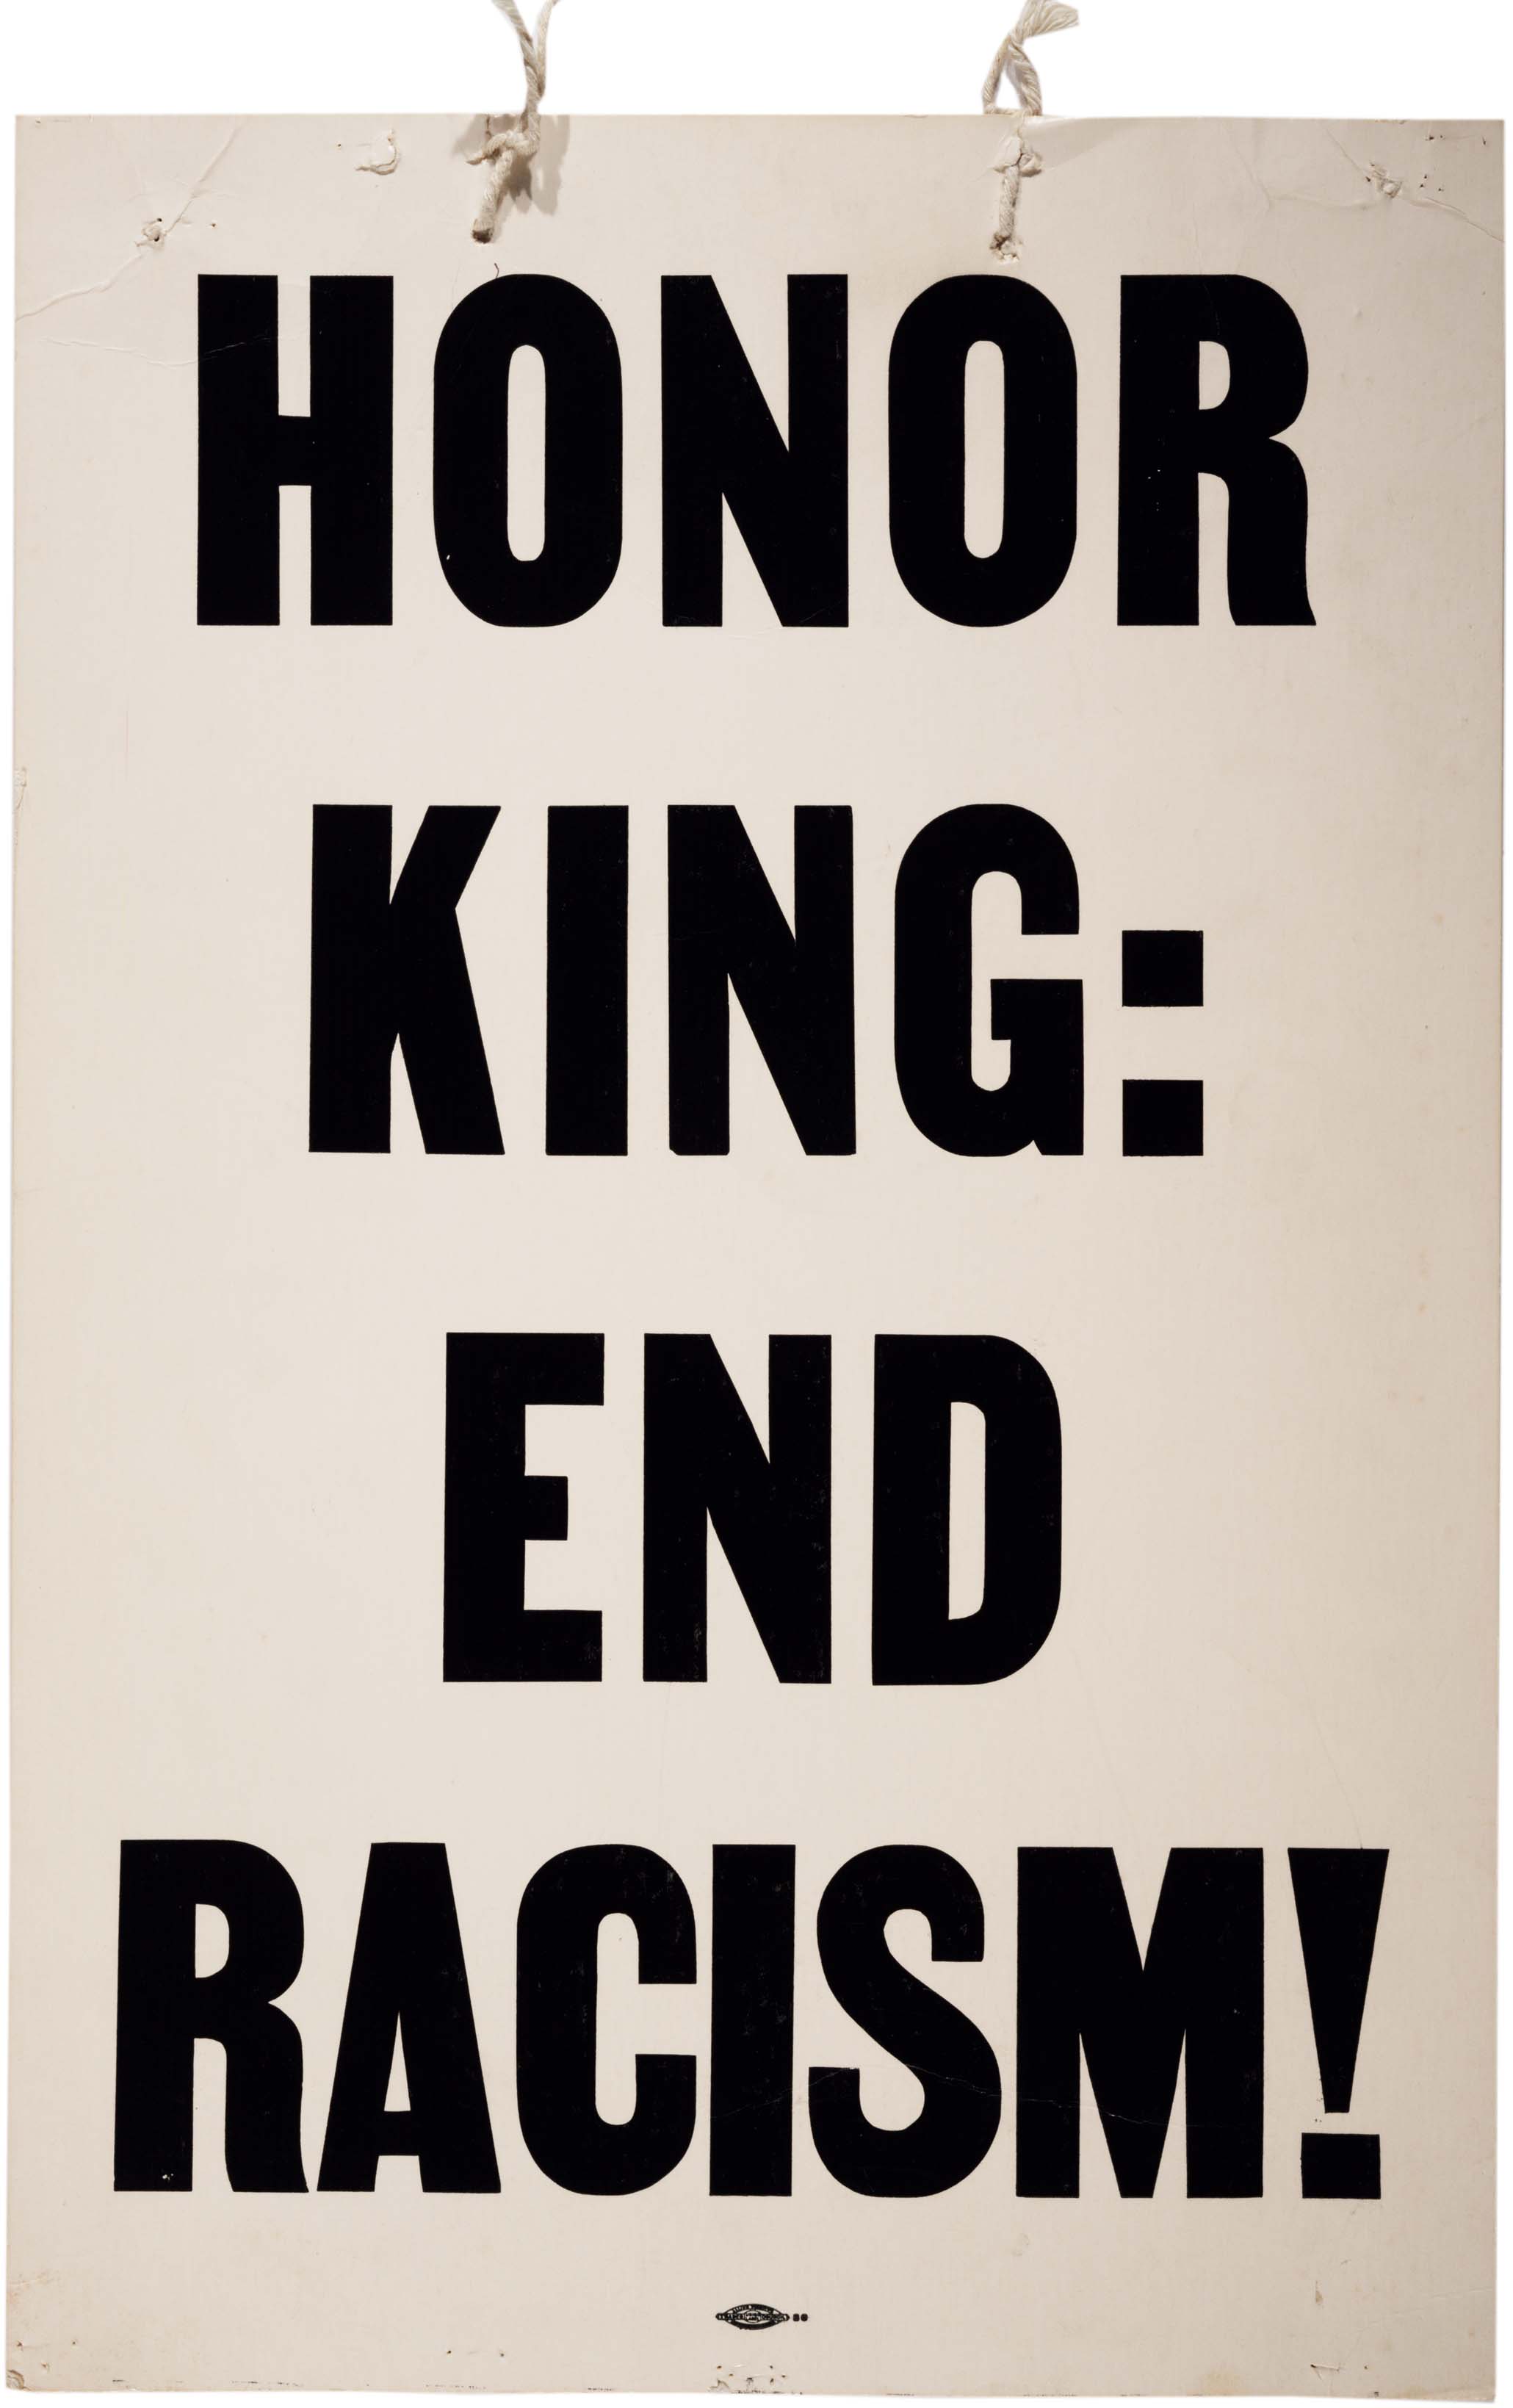 The History of American Protest (Broadside "HONOR KING: END RADISM!" from the Sanitation Workers Strike of 1968)